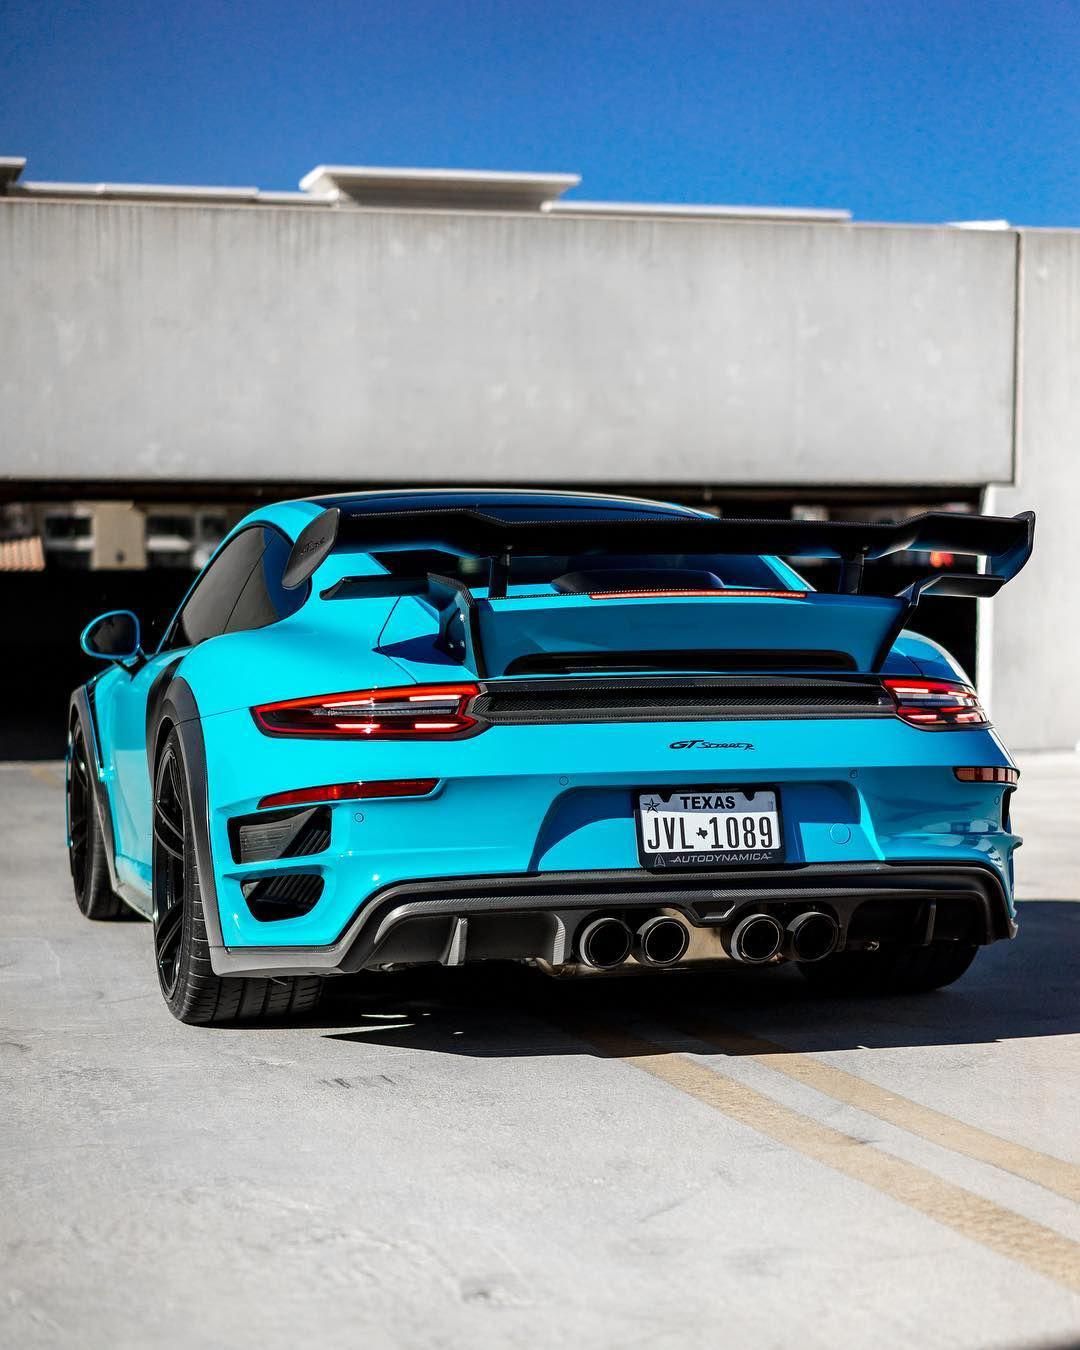 amazing – Exotic Cars of Texas (@exoticcarstexas) on Instagram: “Miami blue. …